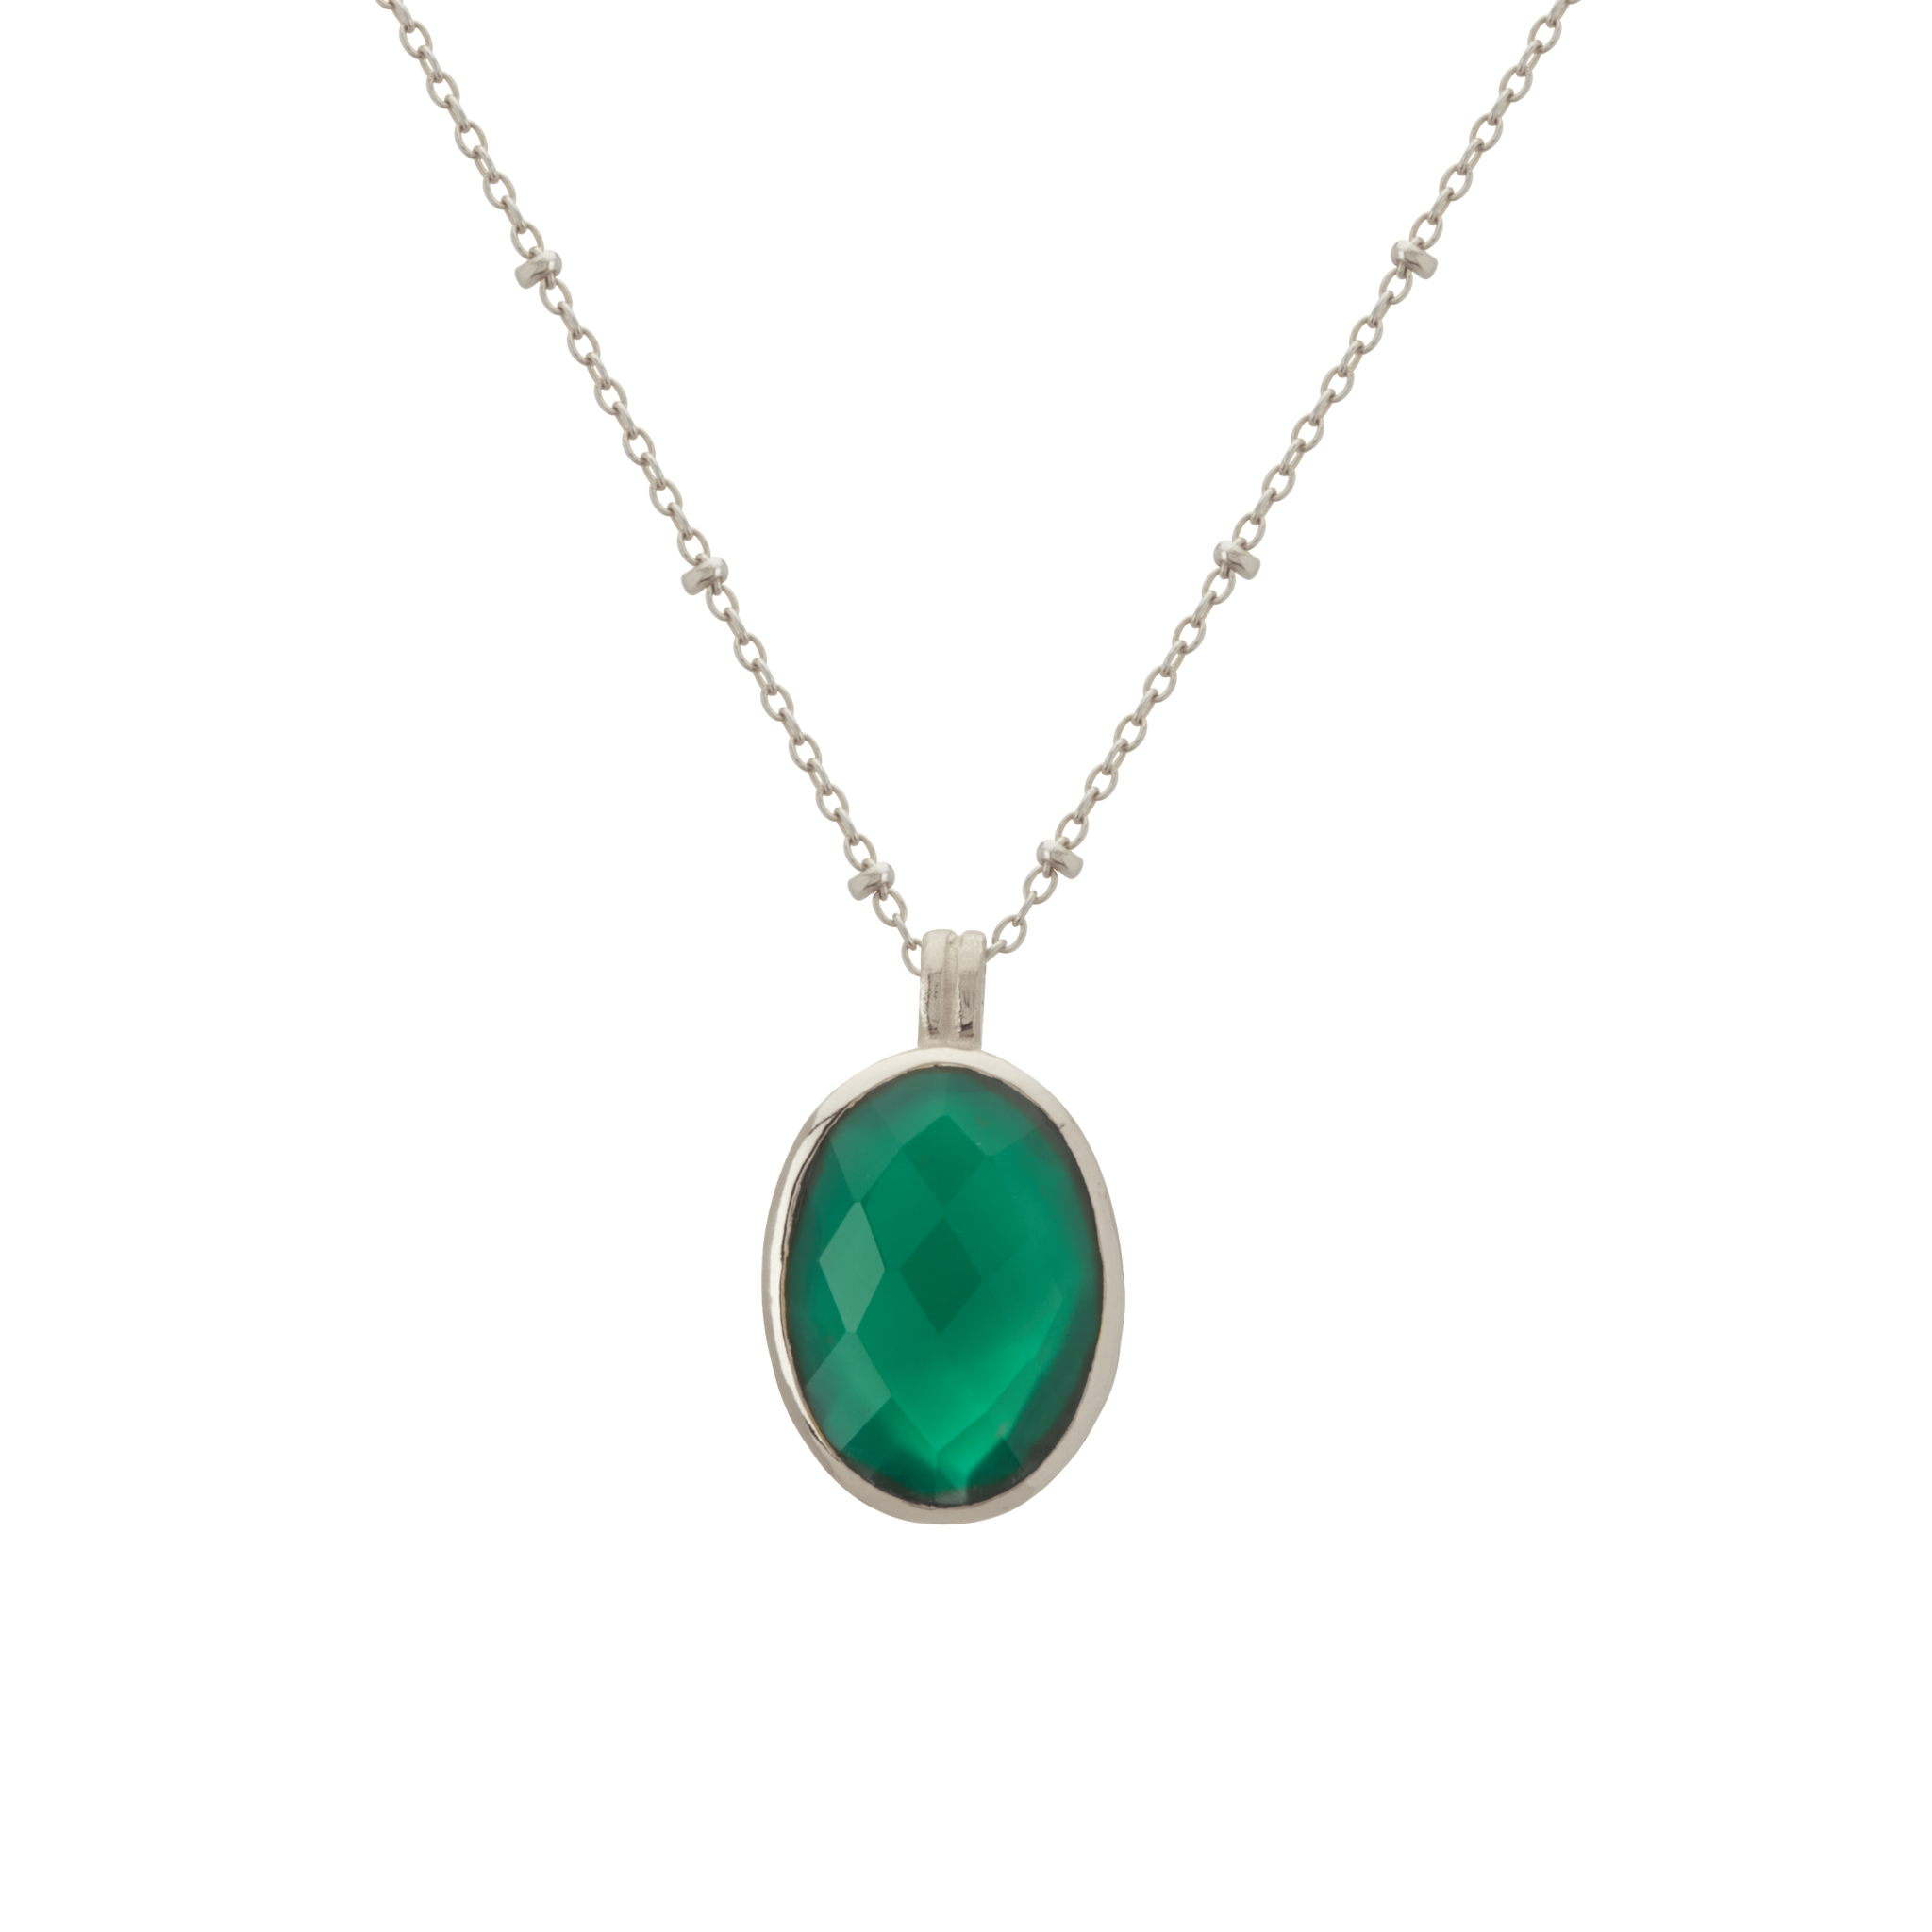 Wandering Soul Green Onyx Pendant Necklace in Sterling Silver